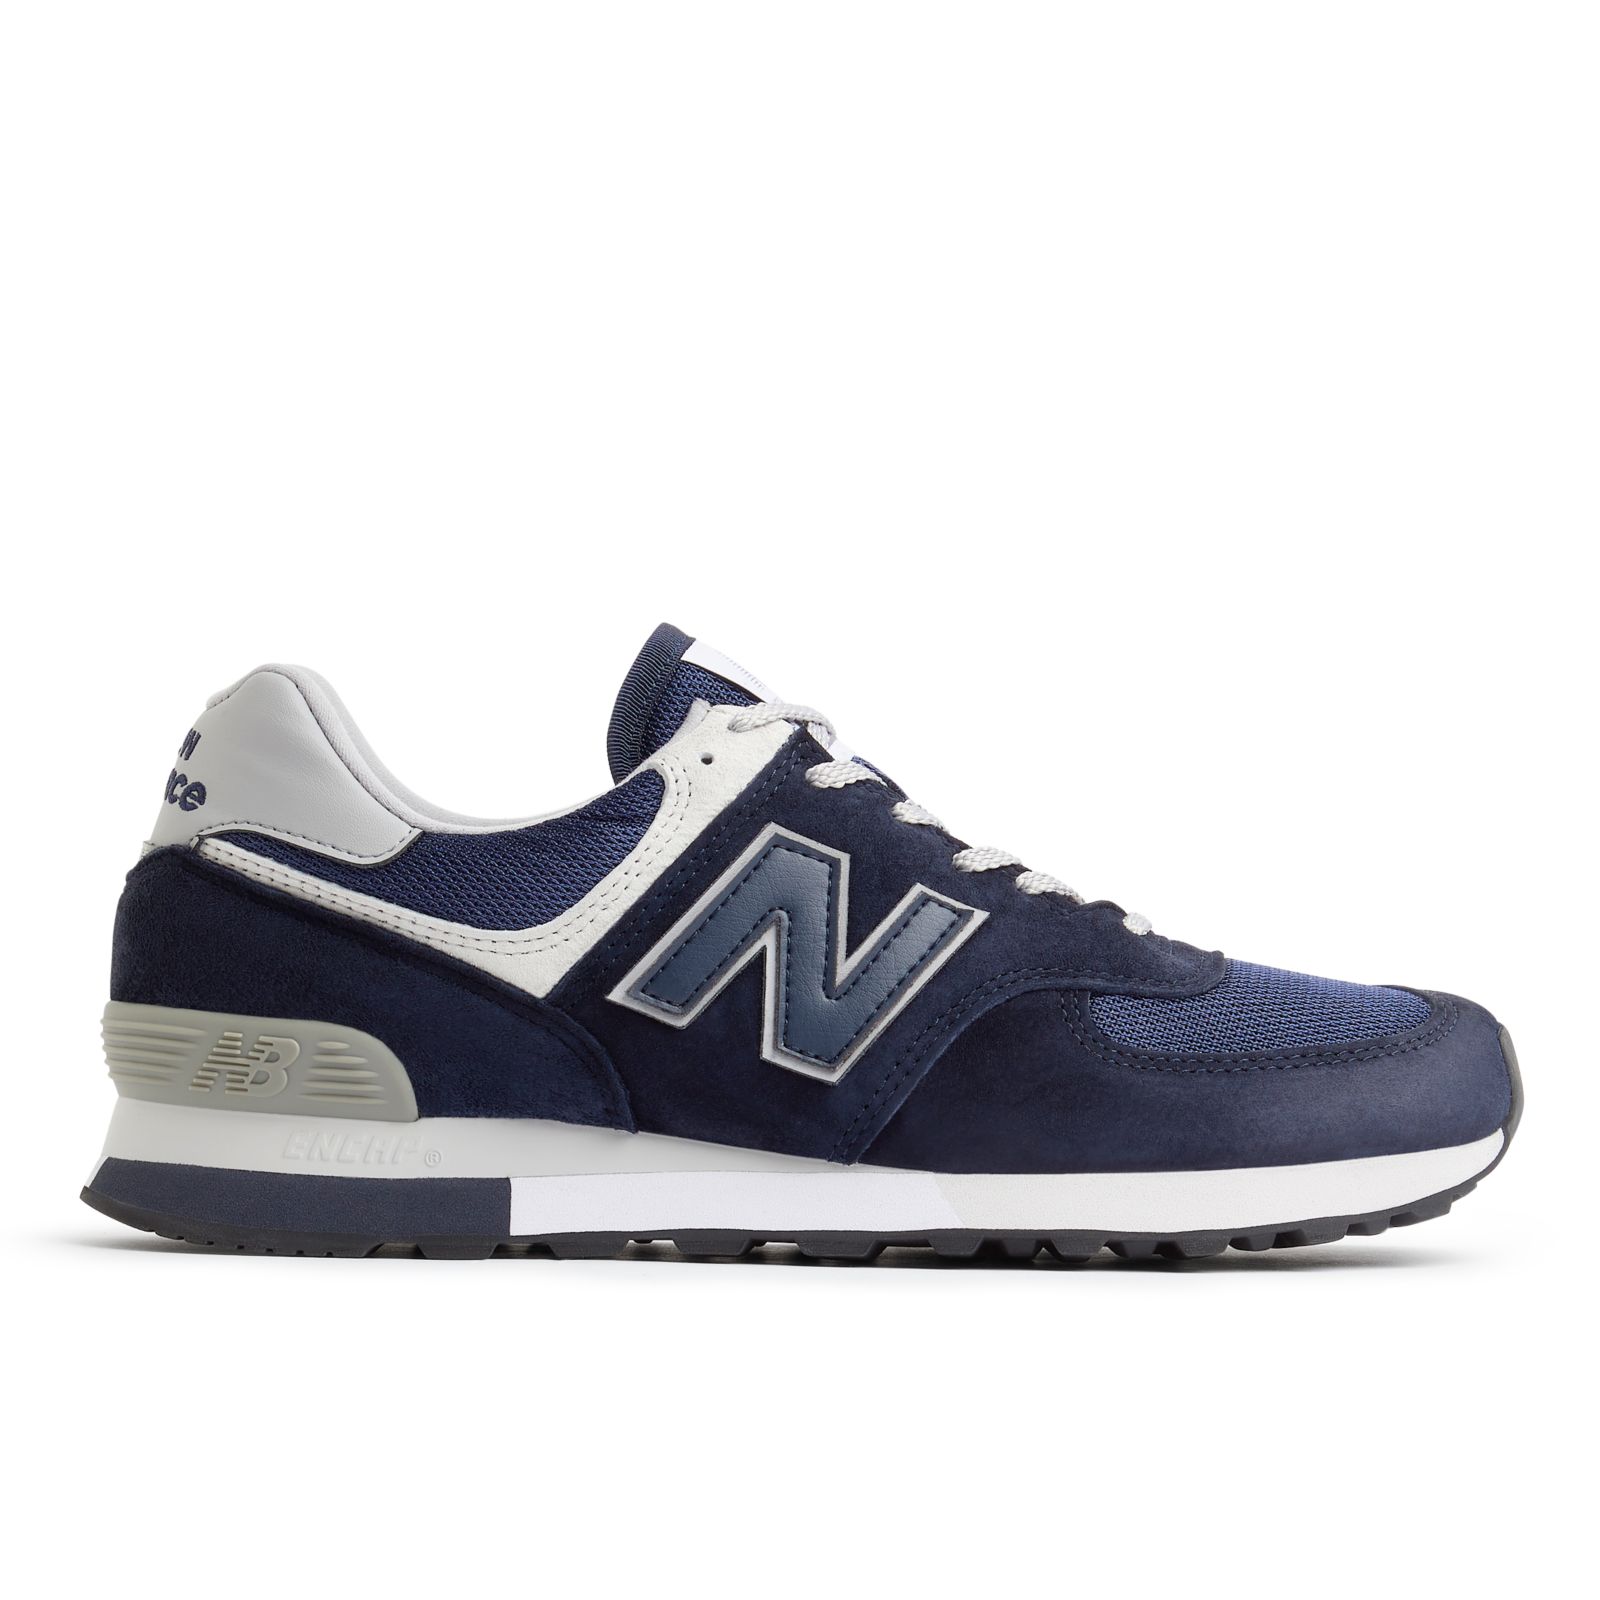 MADE in UK 576 - New Balance